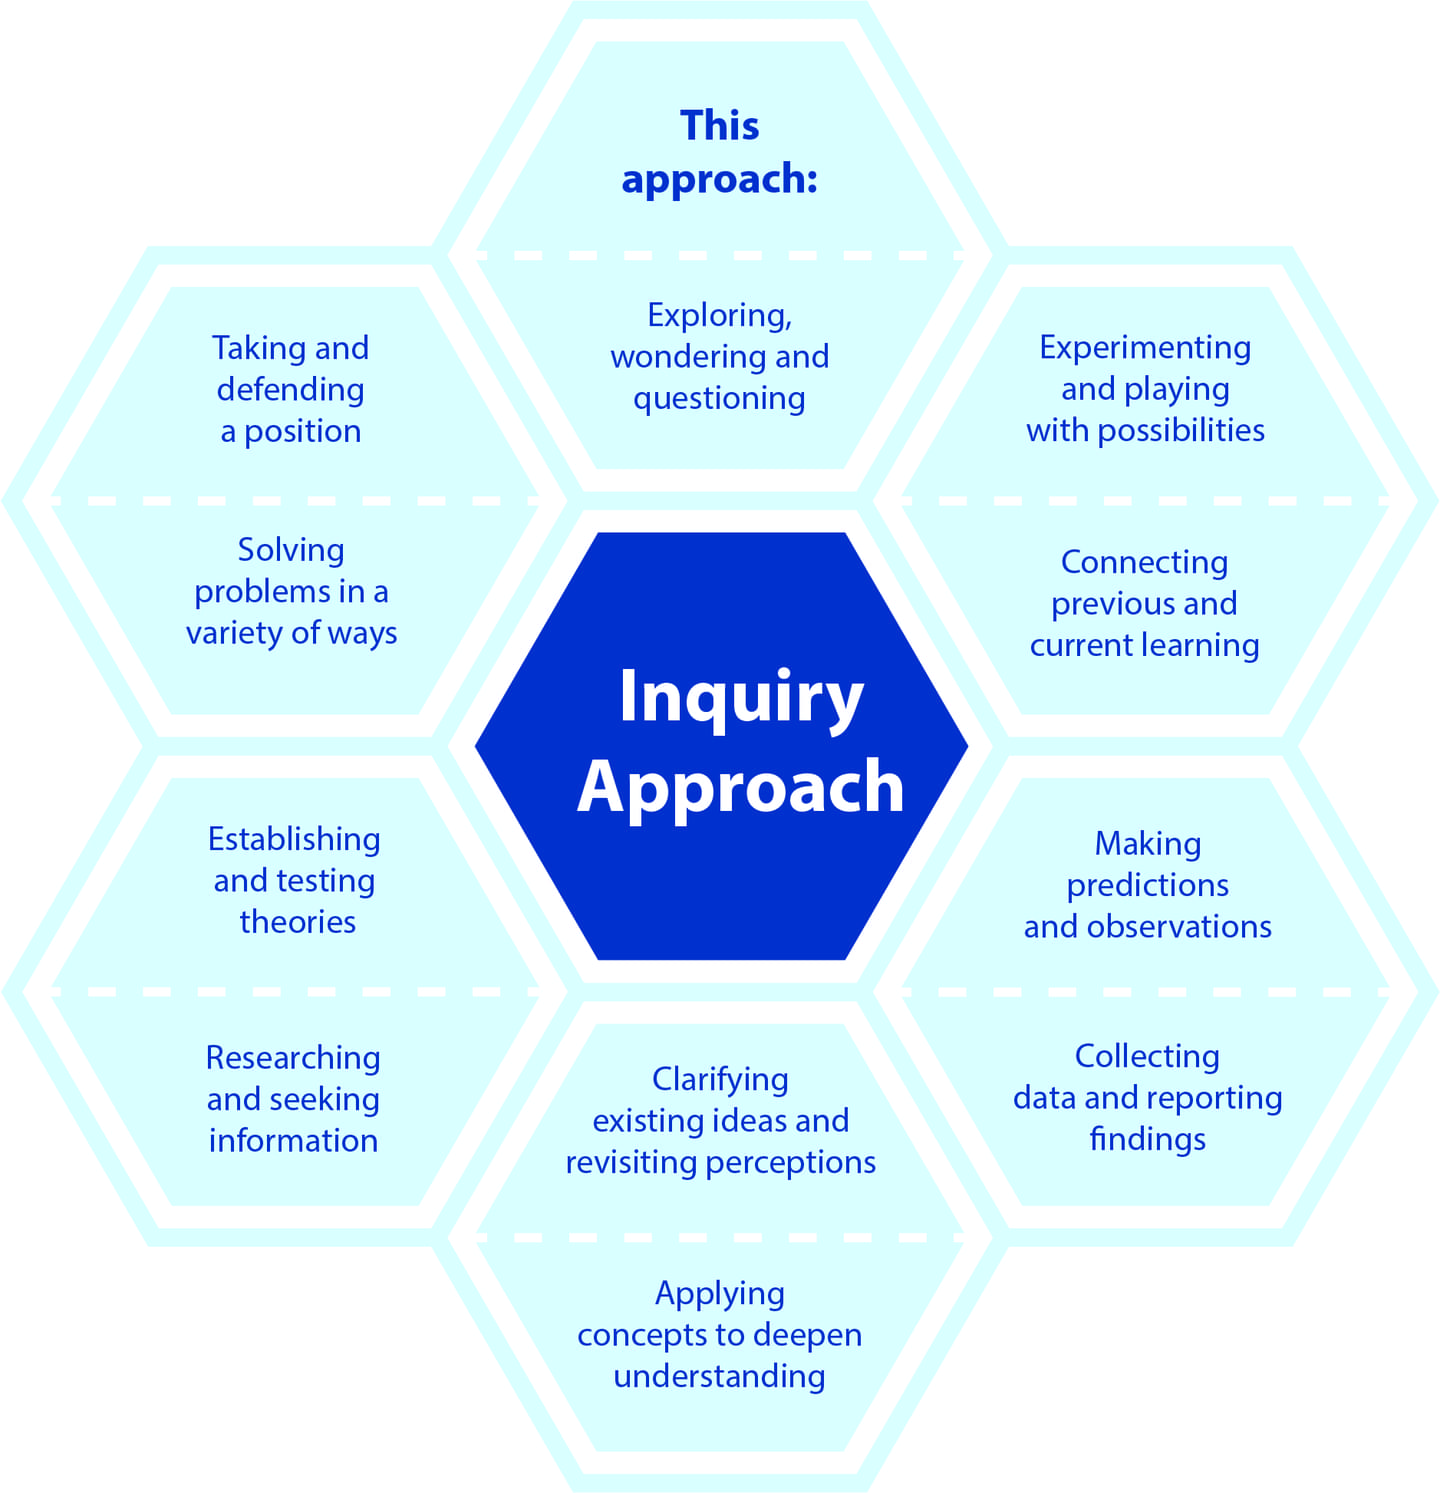 Elements of an Inquiry Approach